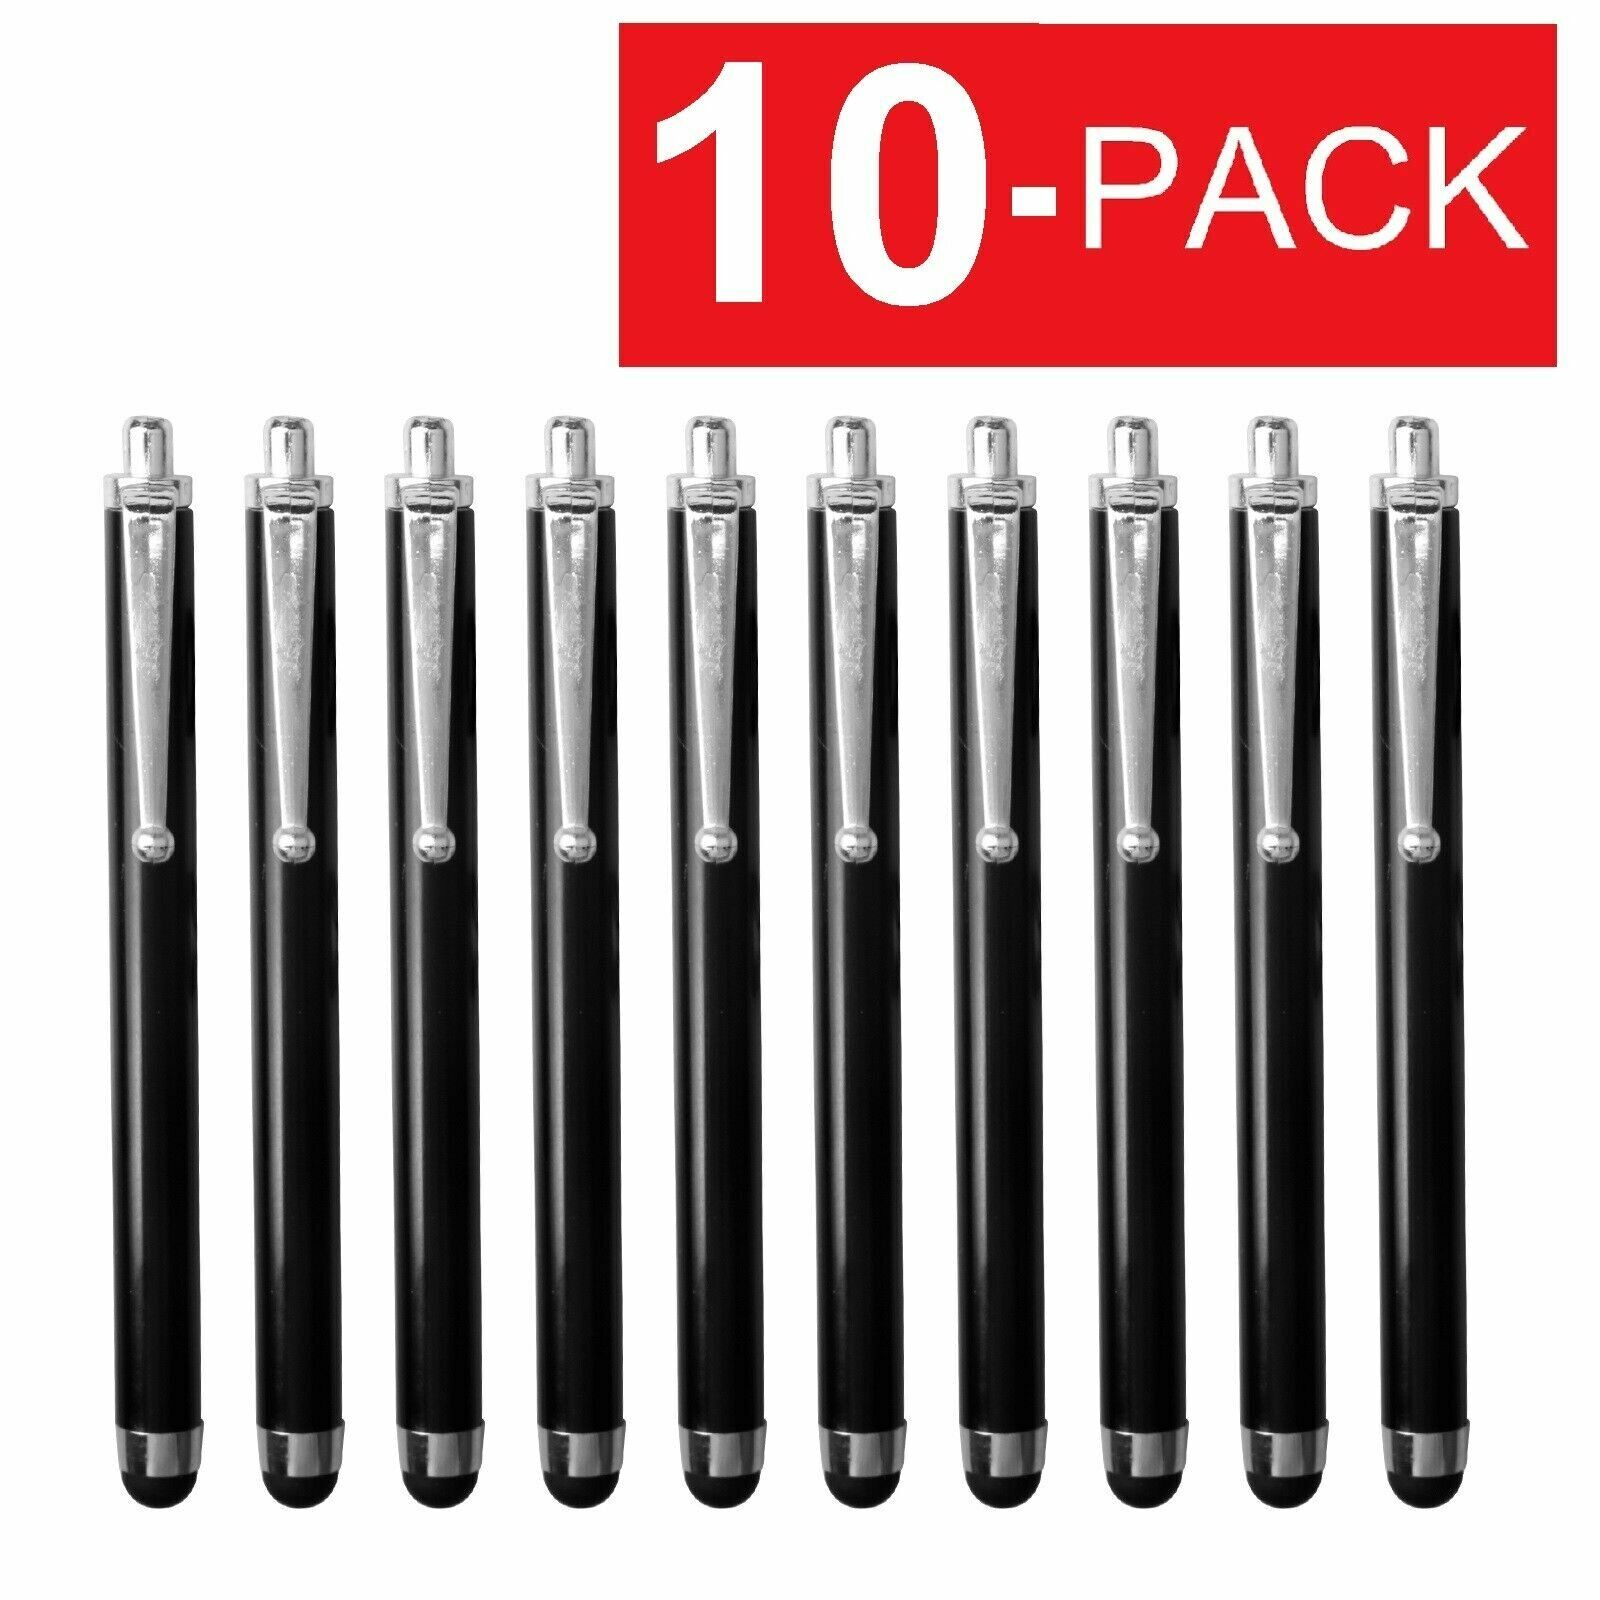 10x Universal Touch Screen Pen Metal Stylus For iPhone 5 6S 7 iPad Samsung Phone